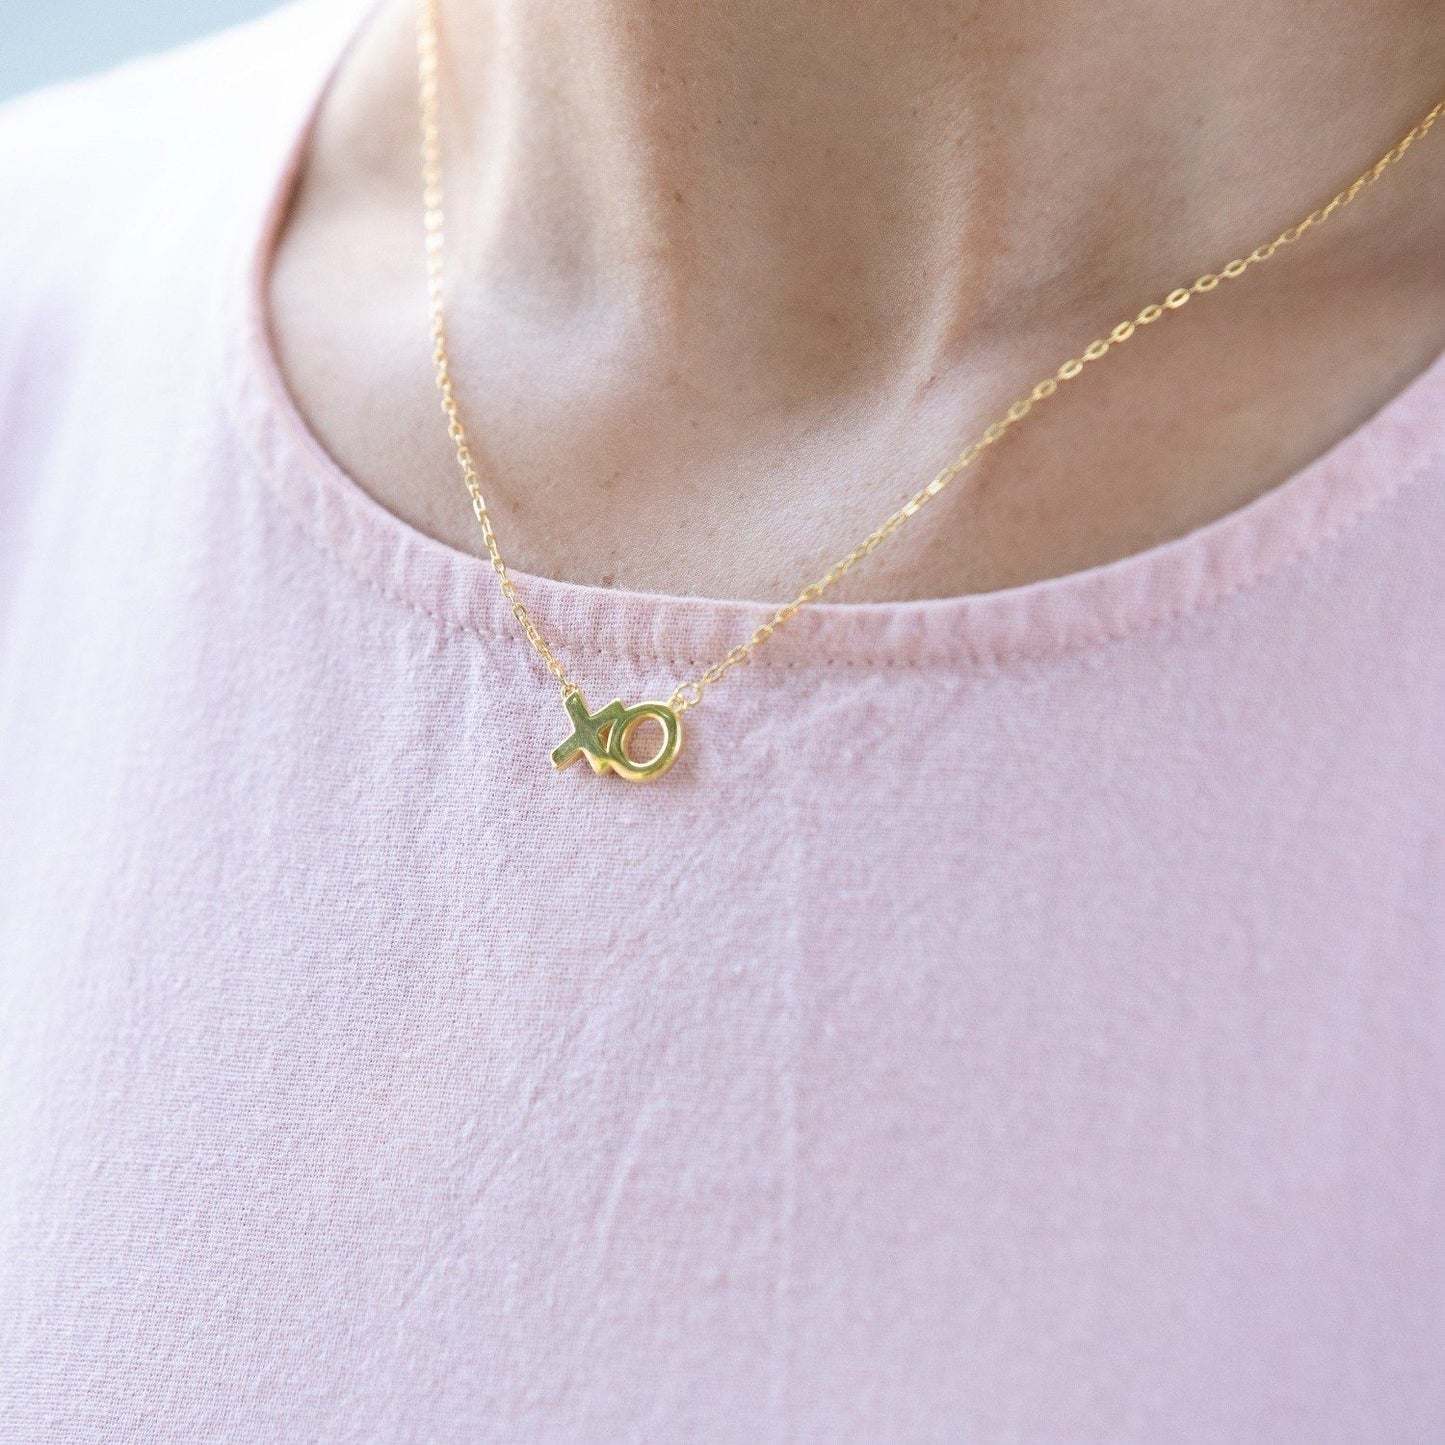 Woman wears a sterling silver necklace with 14k gold plating, that features 'XO' in text .